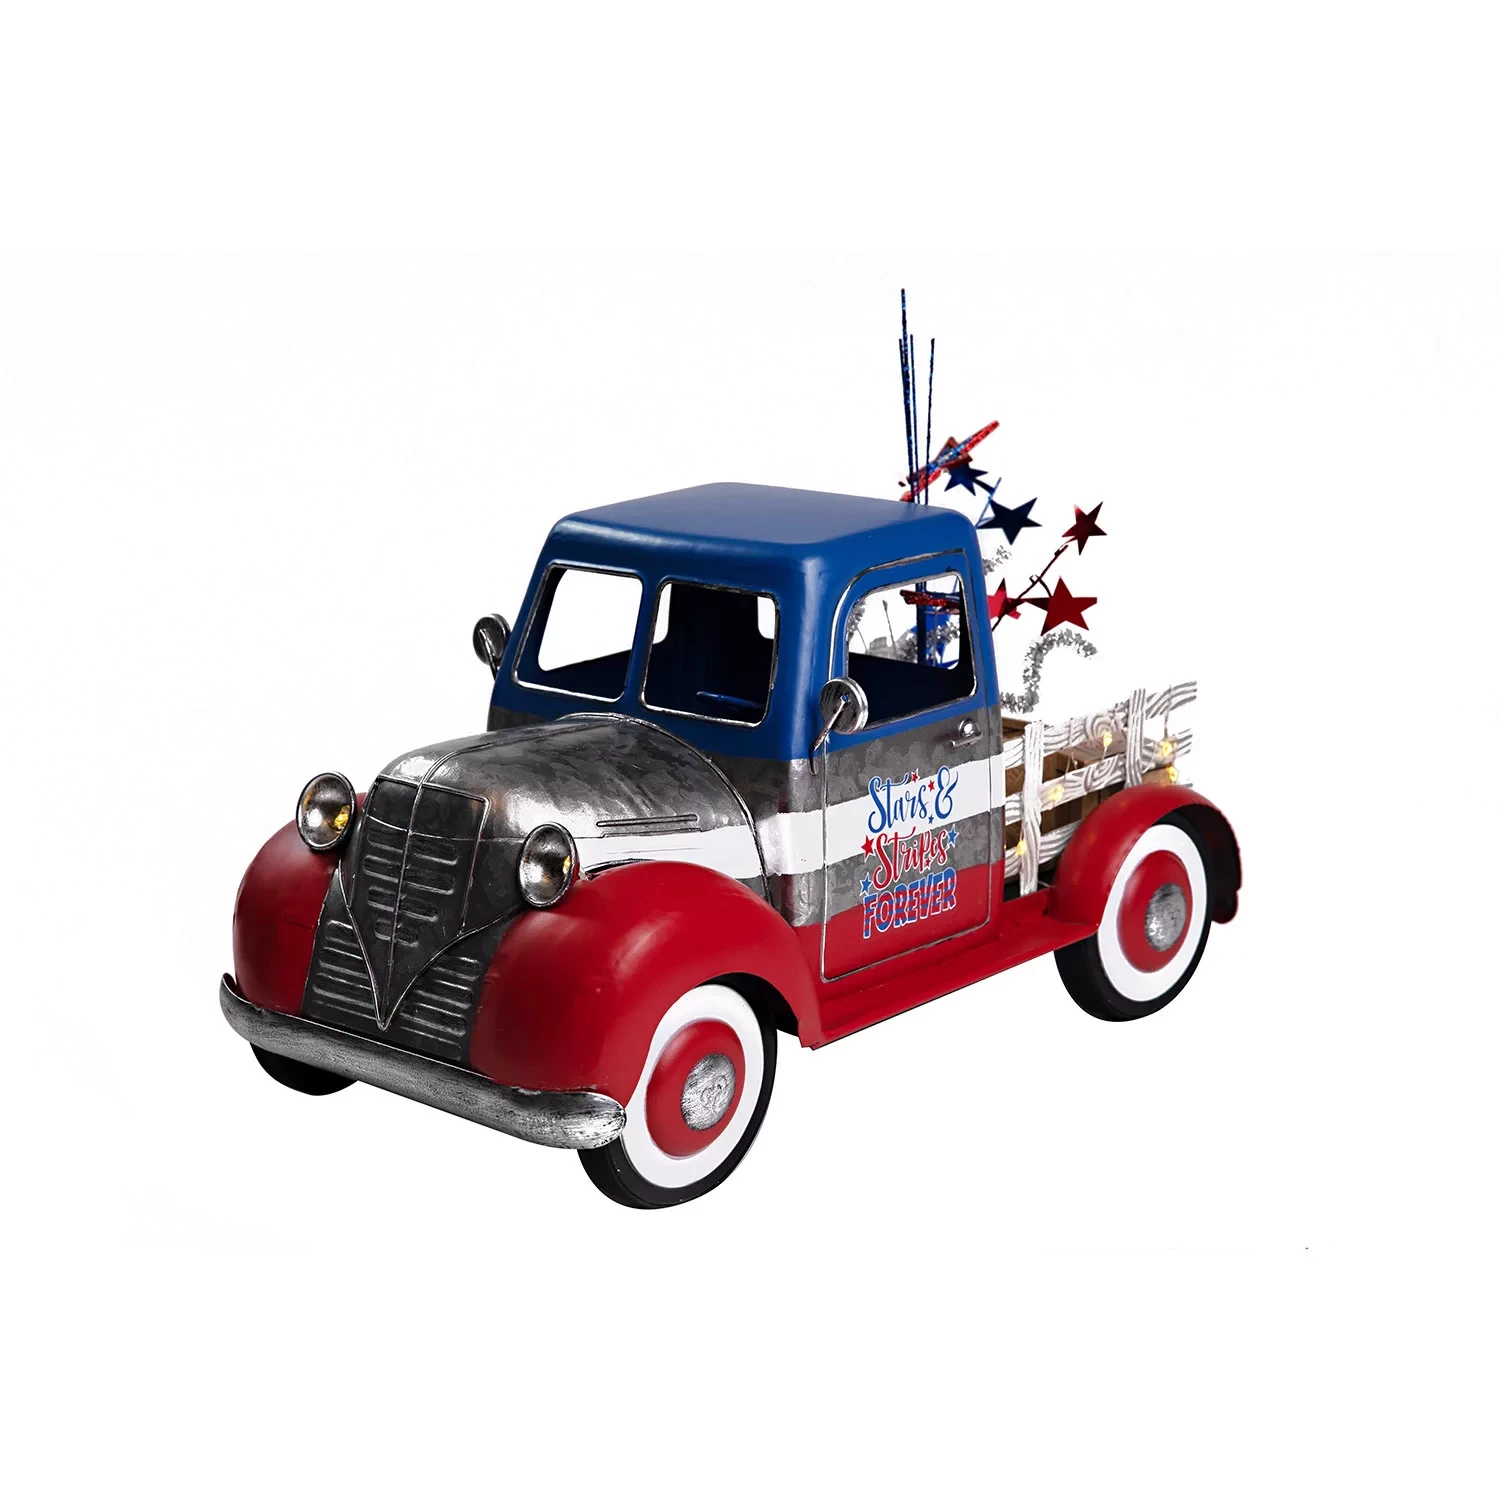 Member's Mark Vintage Truck - Red, White, and Blue Truck